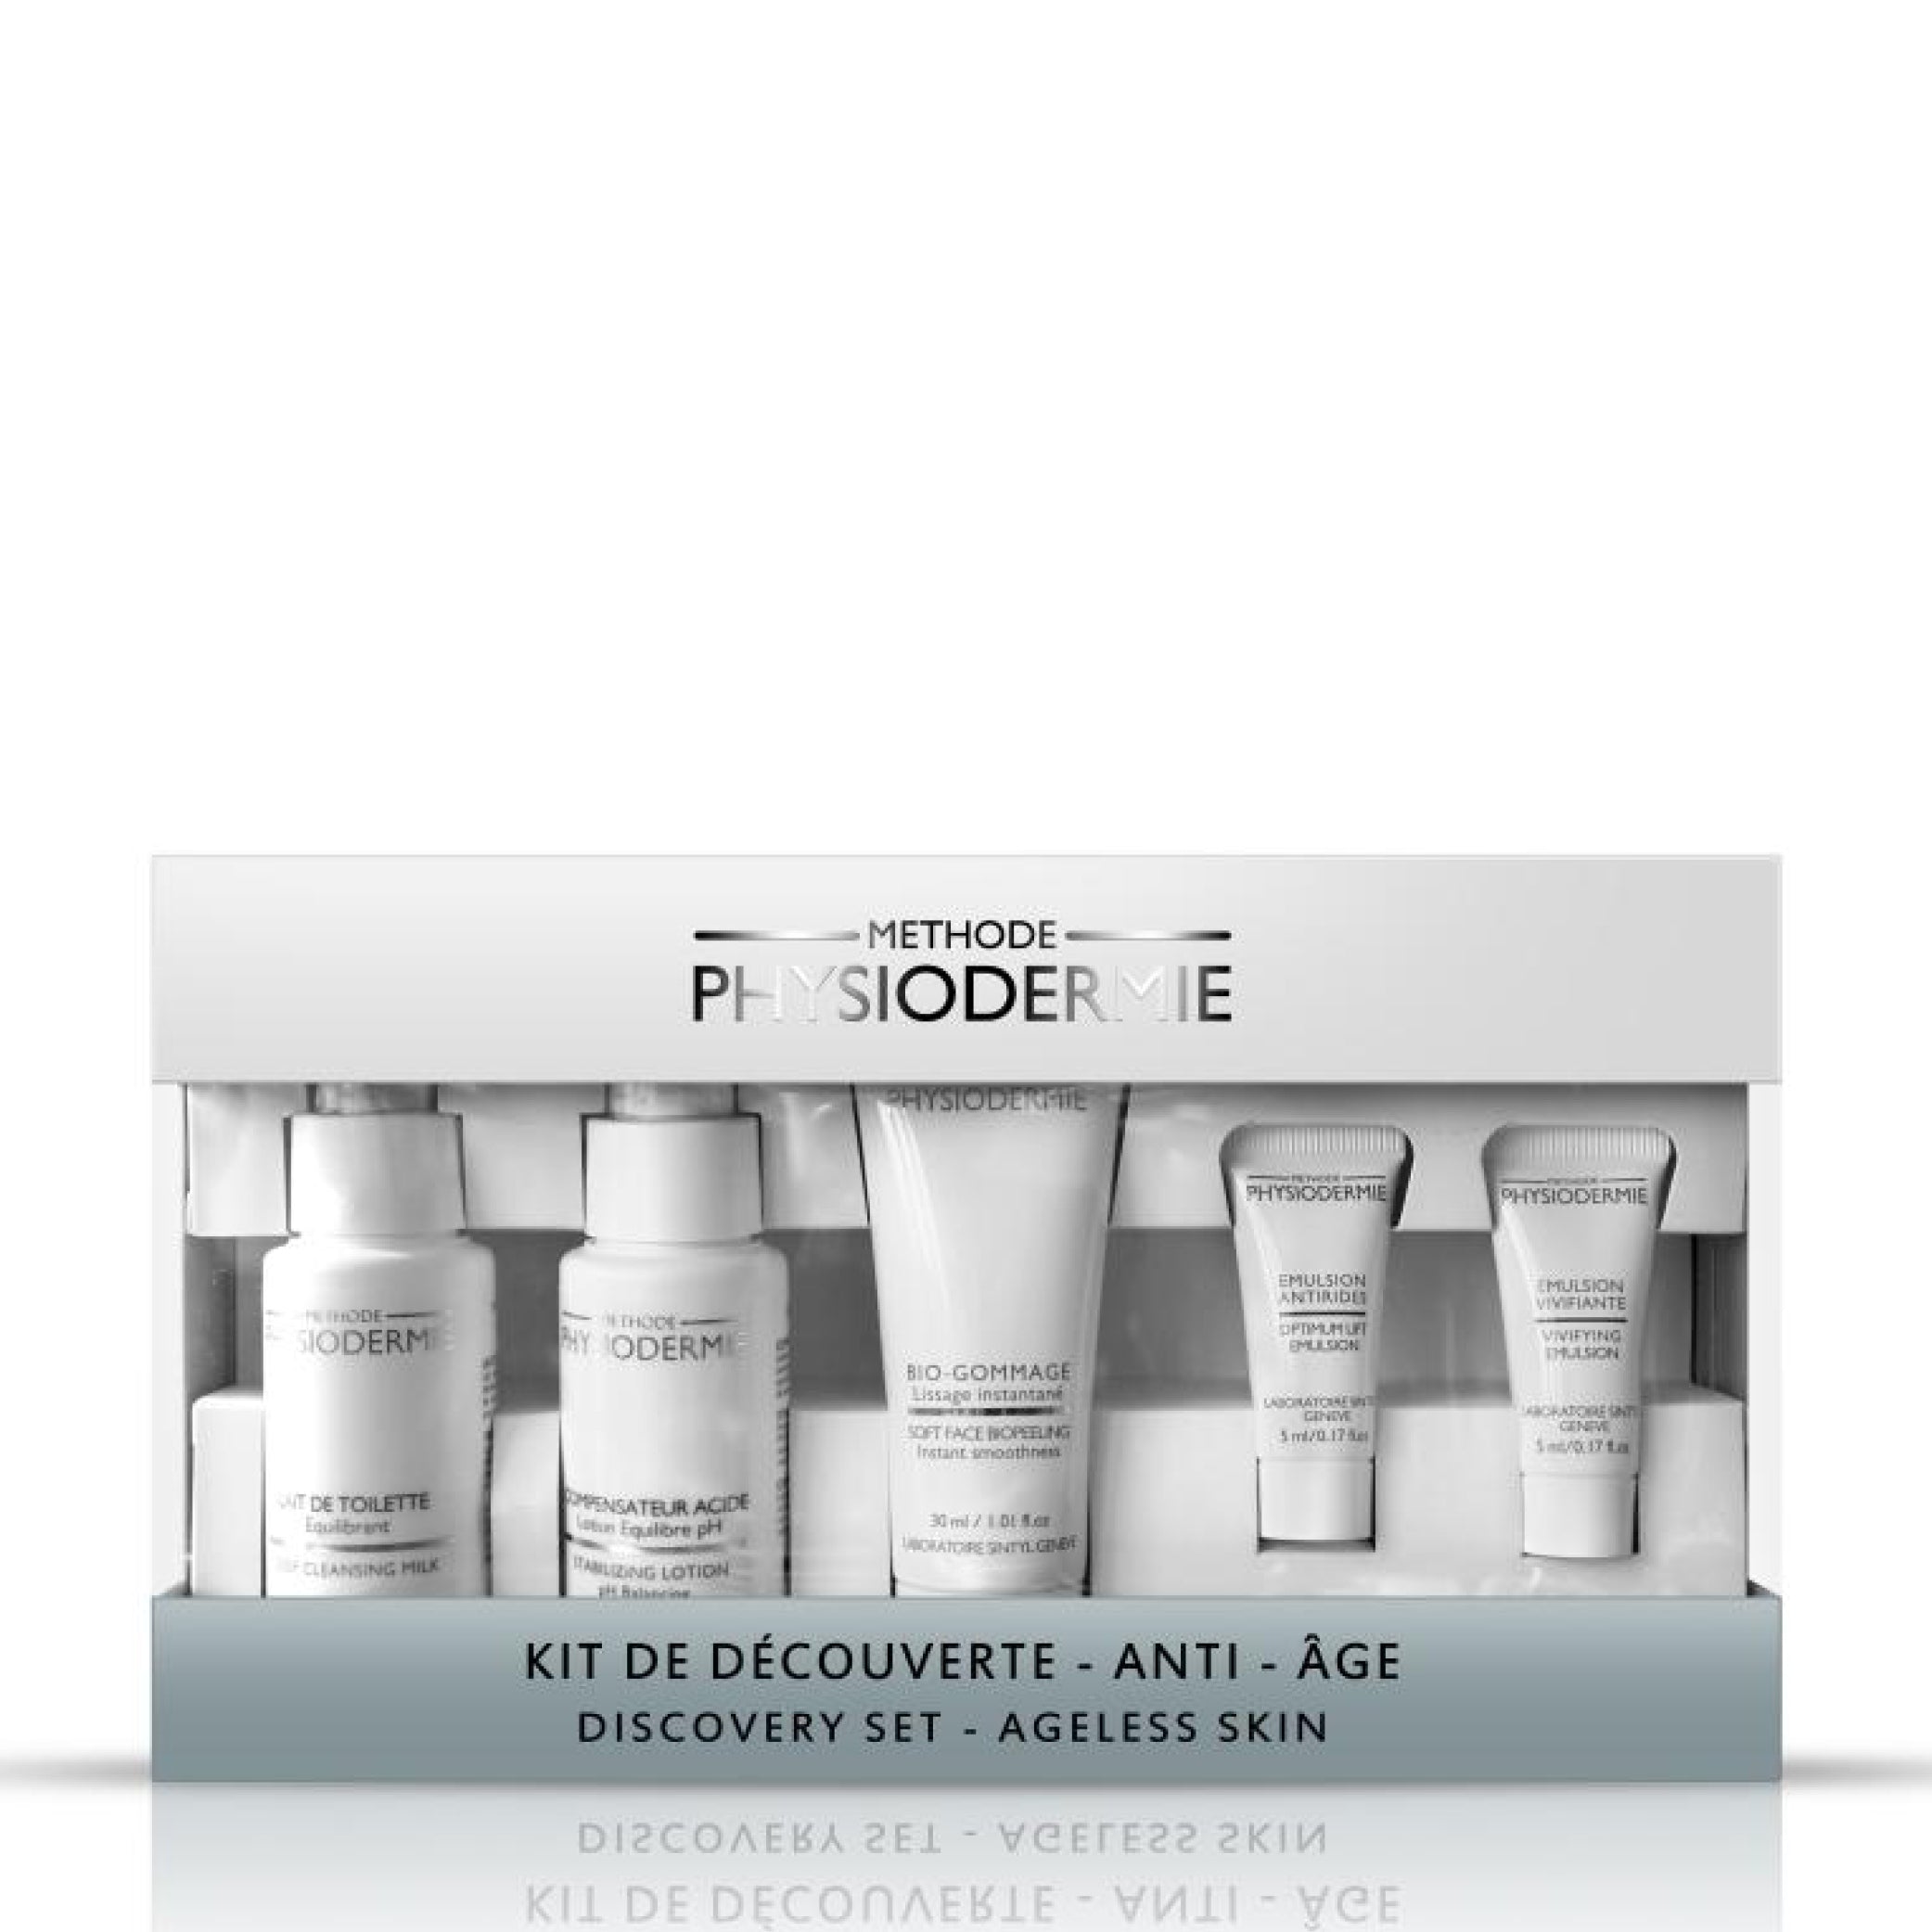 DISCOVERY SET – AGELESS SKIN